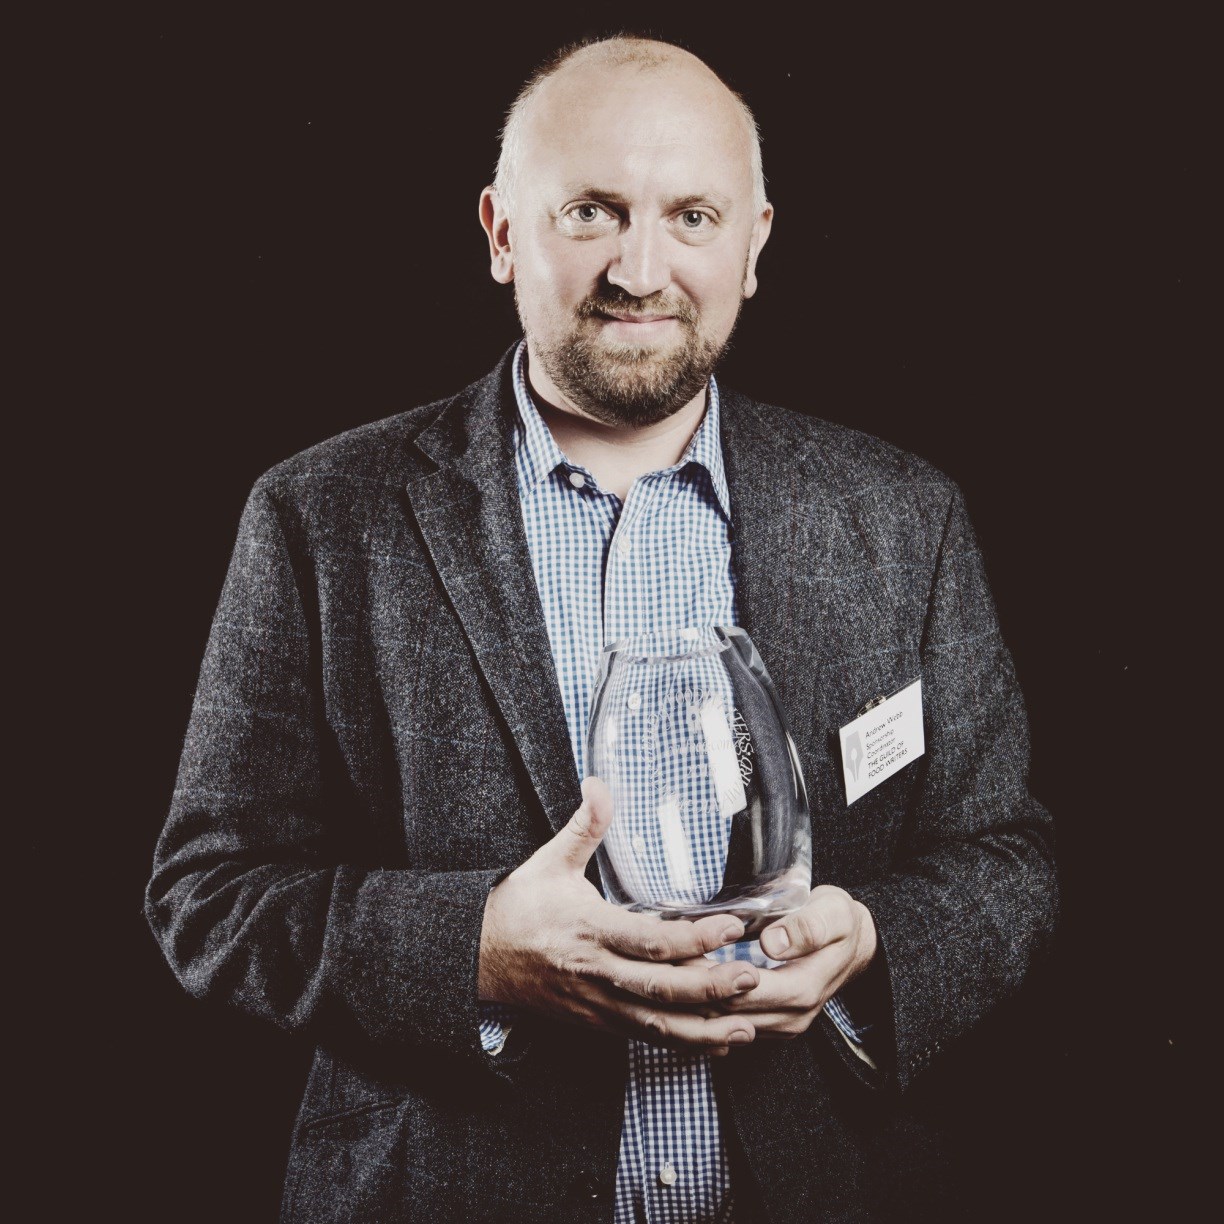 Andrew Webb from LoveFood (winners of the New Media Award)